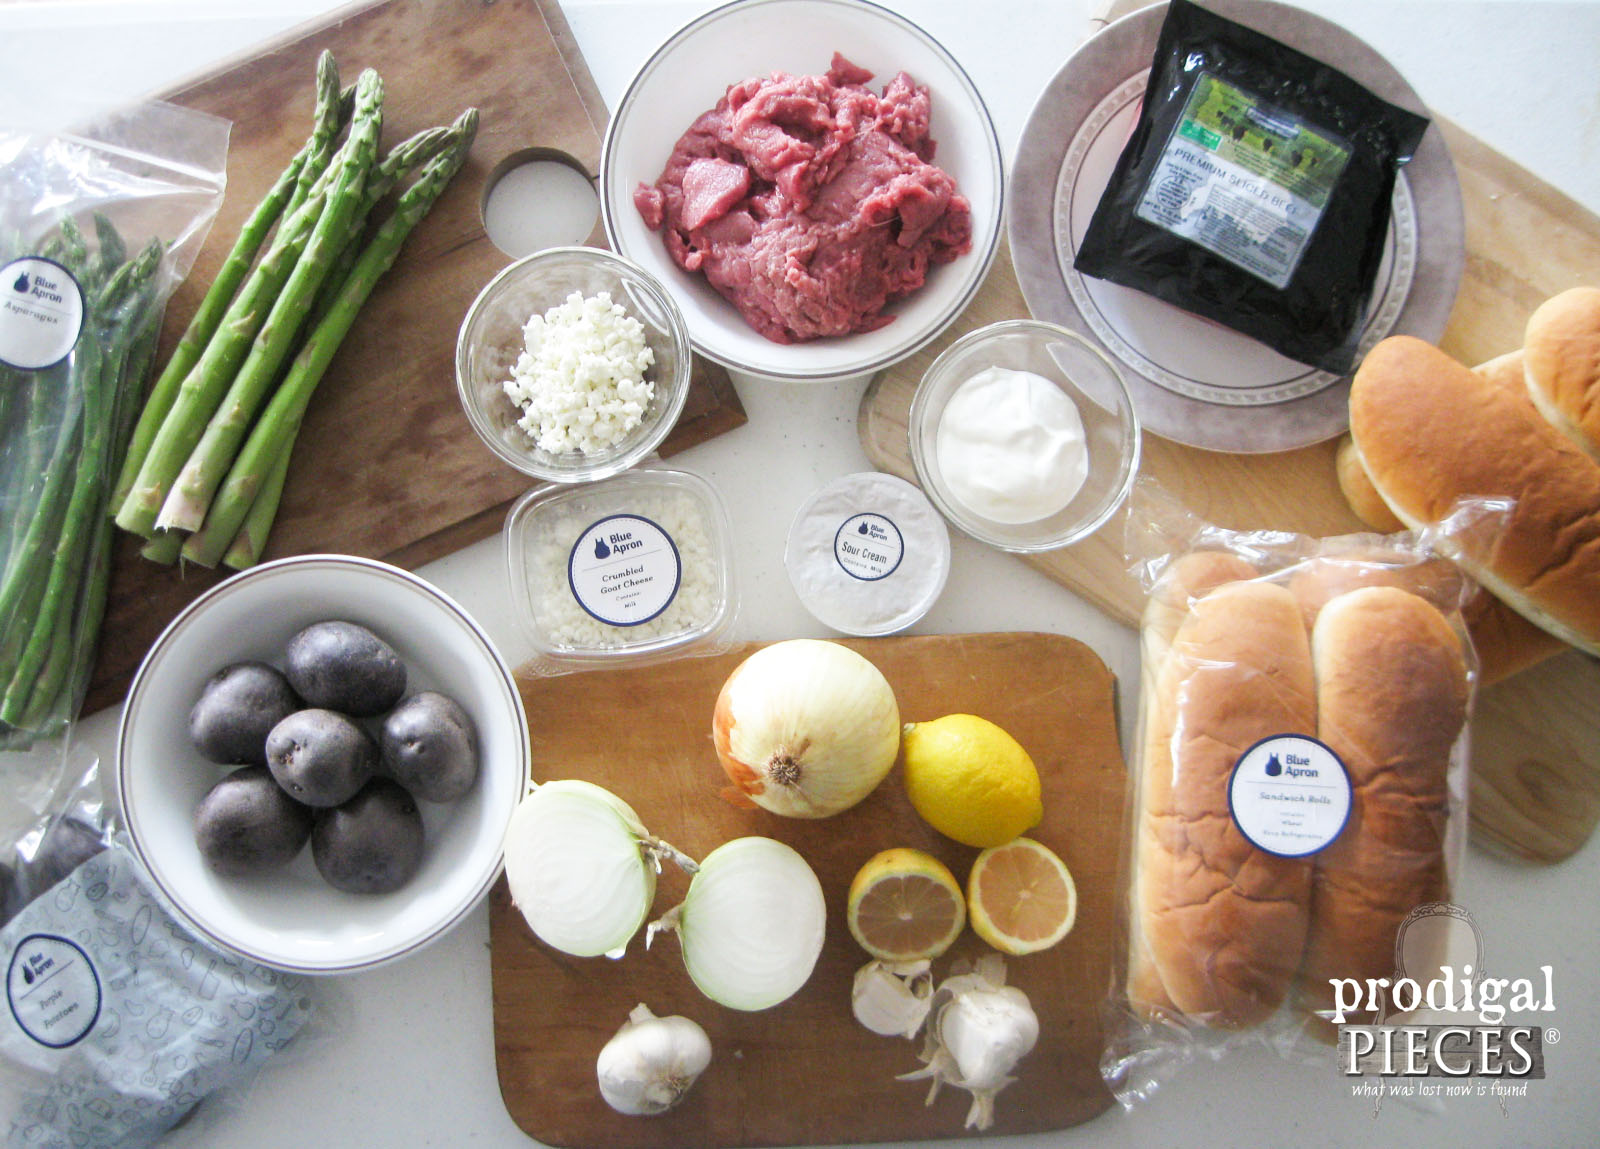 Blue Apron Meal Service for a Family of 8 | Prodigal Pieces | www.prodigalpieces.com